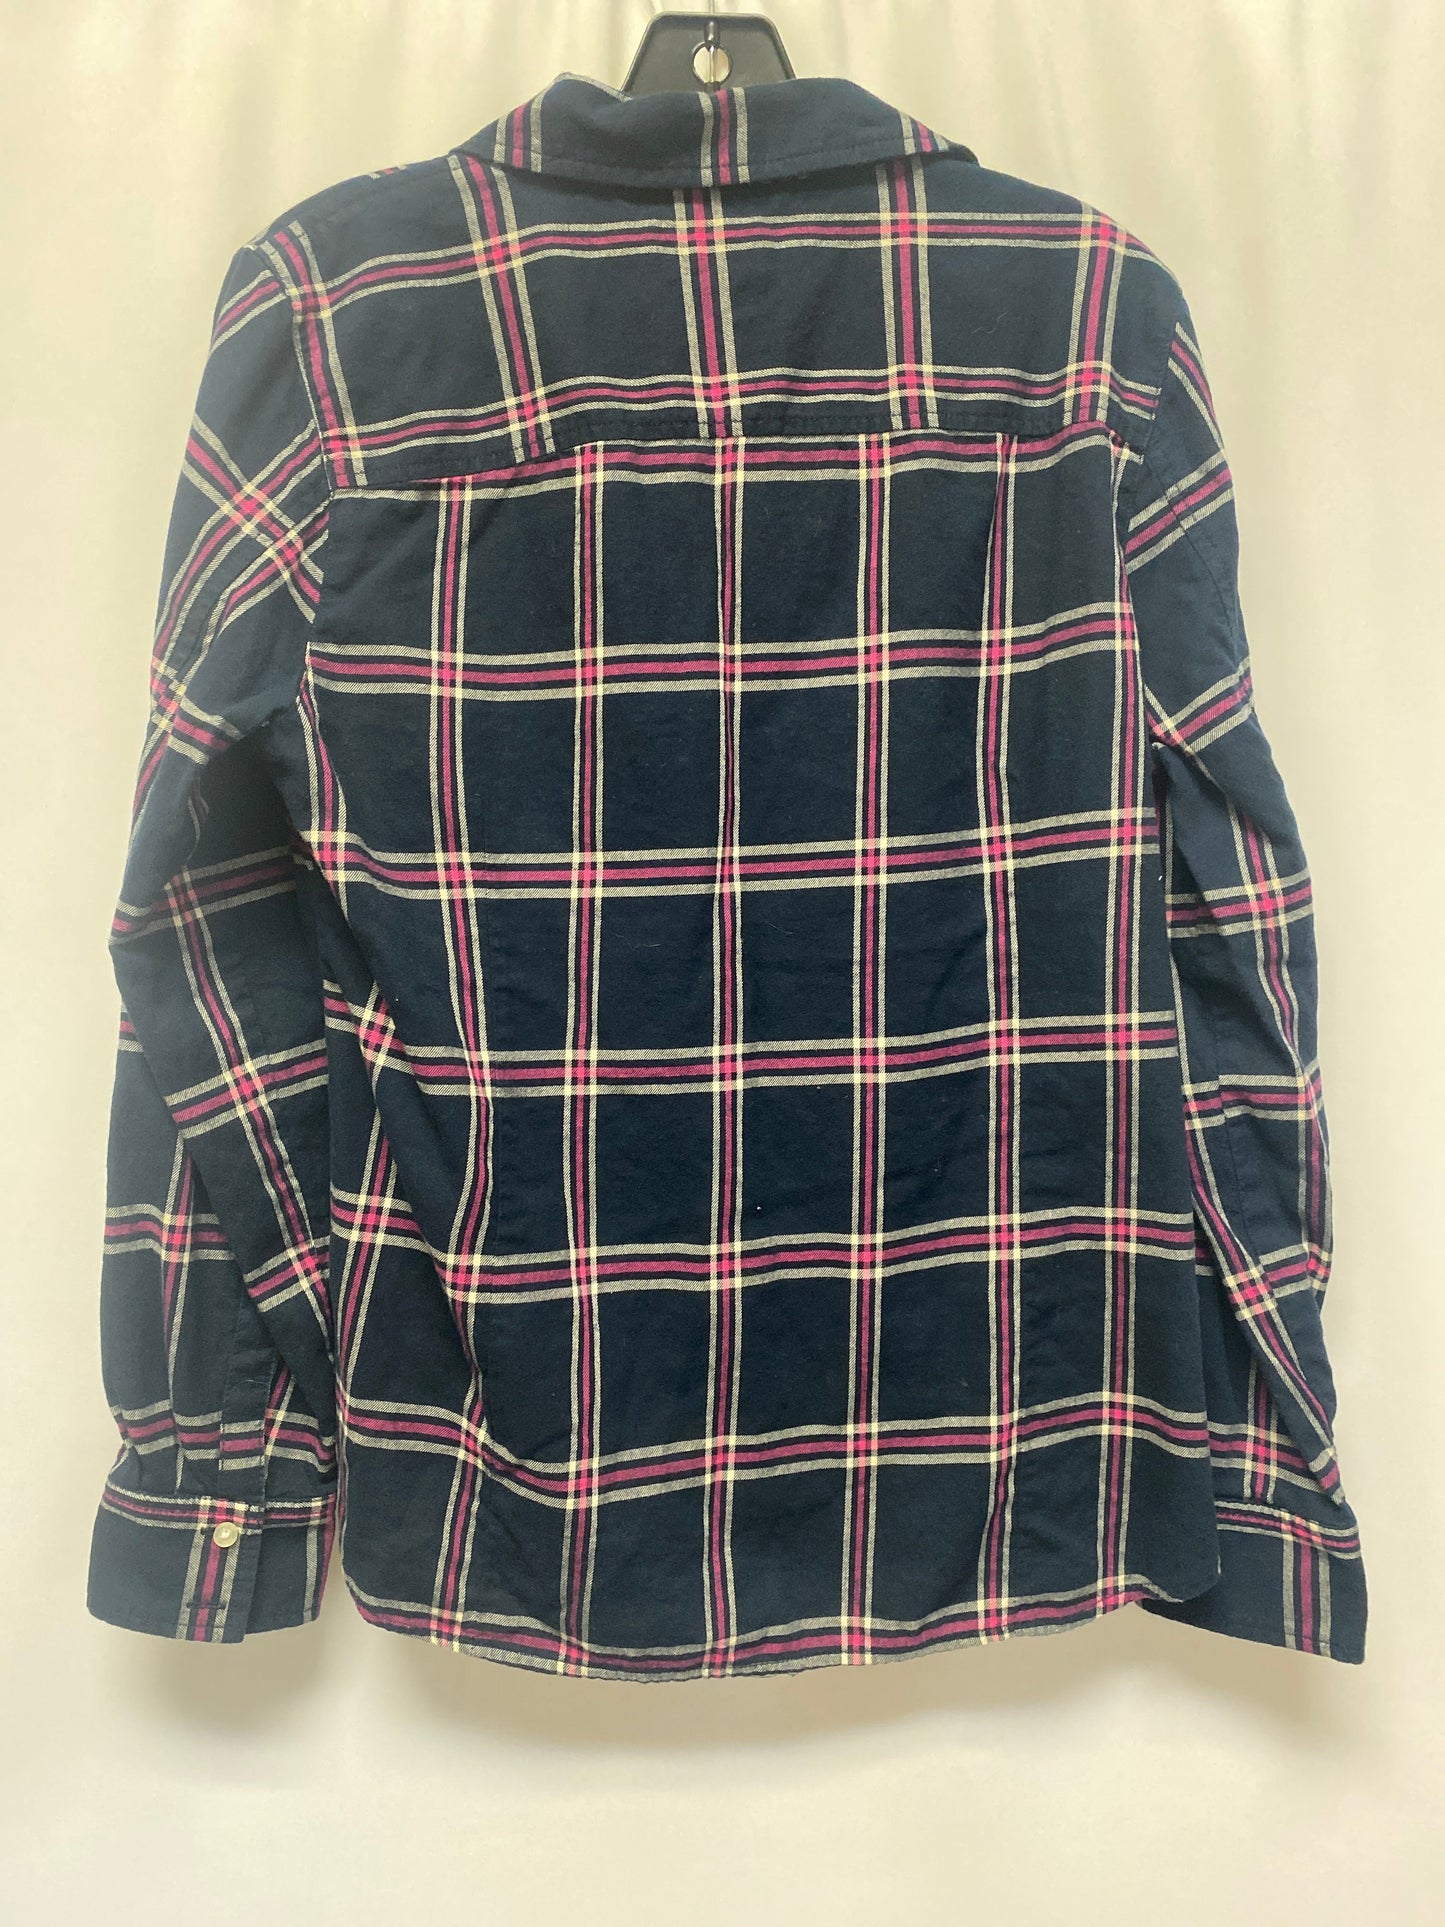 Blue Top Long Sleeve Tommy Hilfiger, Size M